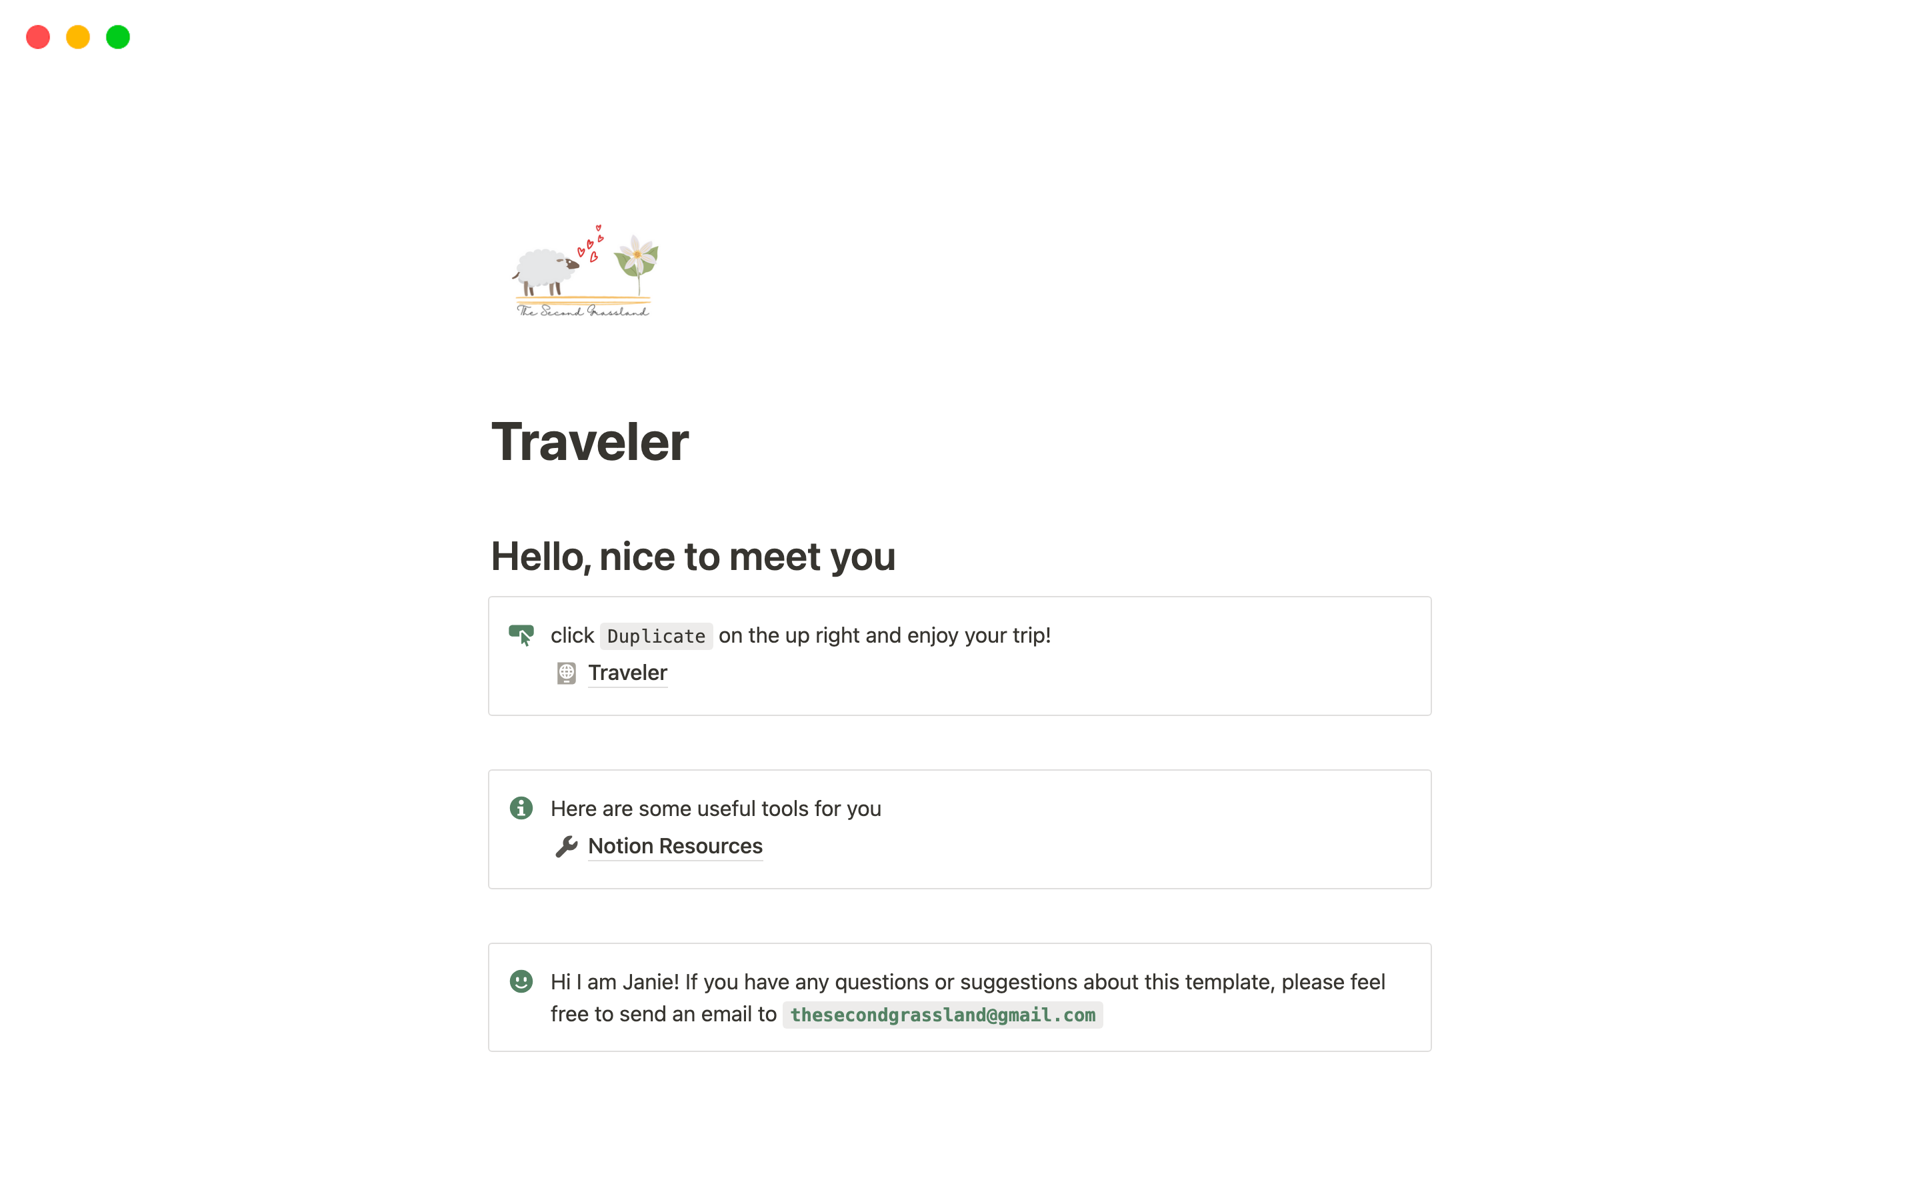 Traveler is an all-in-one travel companion capable of managing schedules, creating reminders and packing lists, recording expenses and payment methods, and facilitating the sharing and collaborative editing of itineraries with friends.